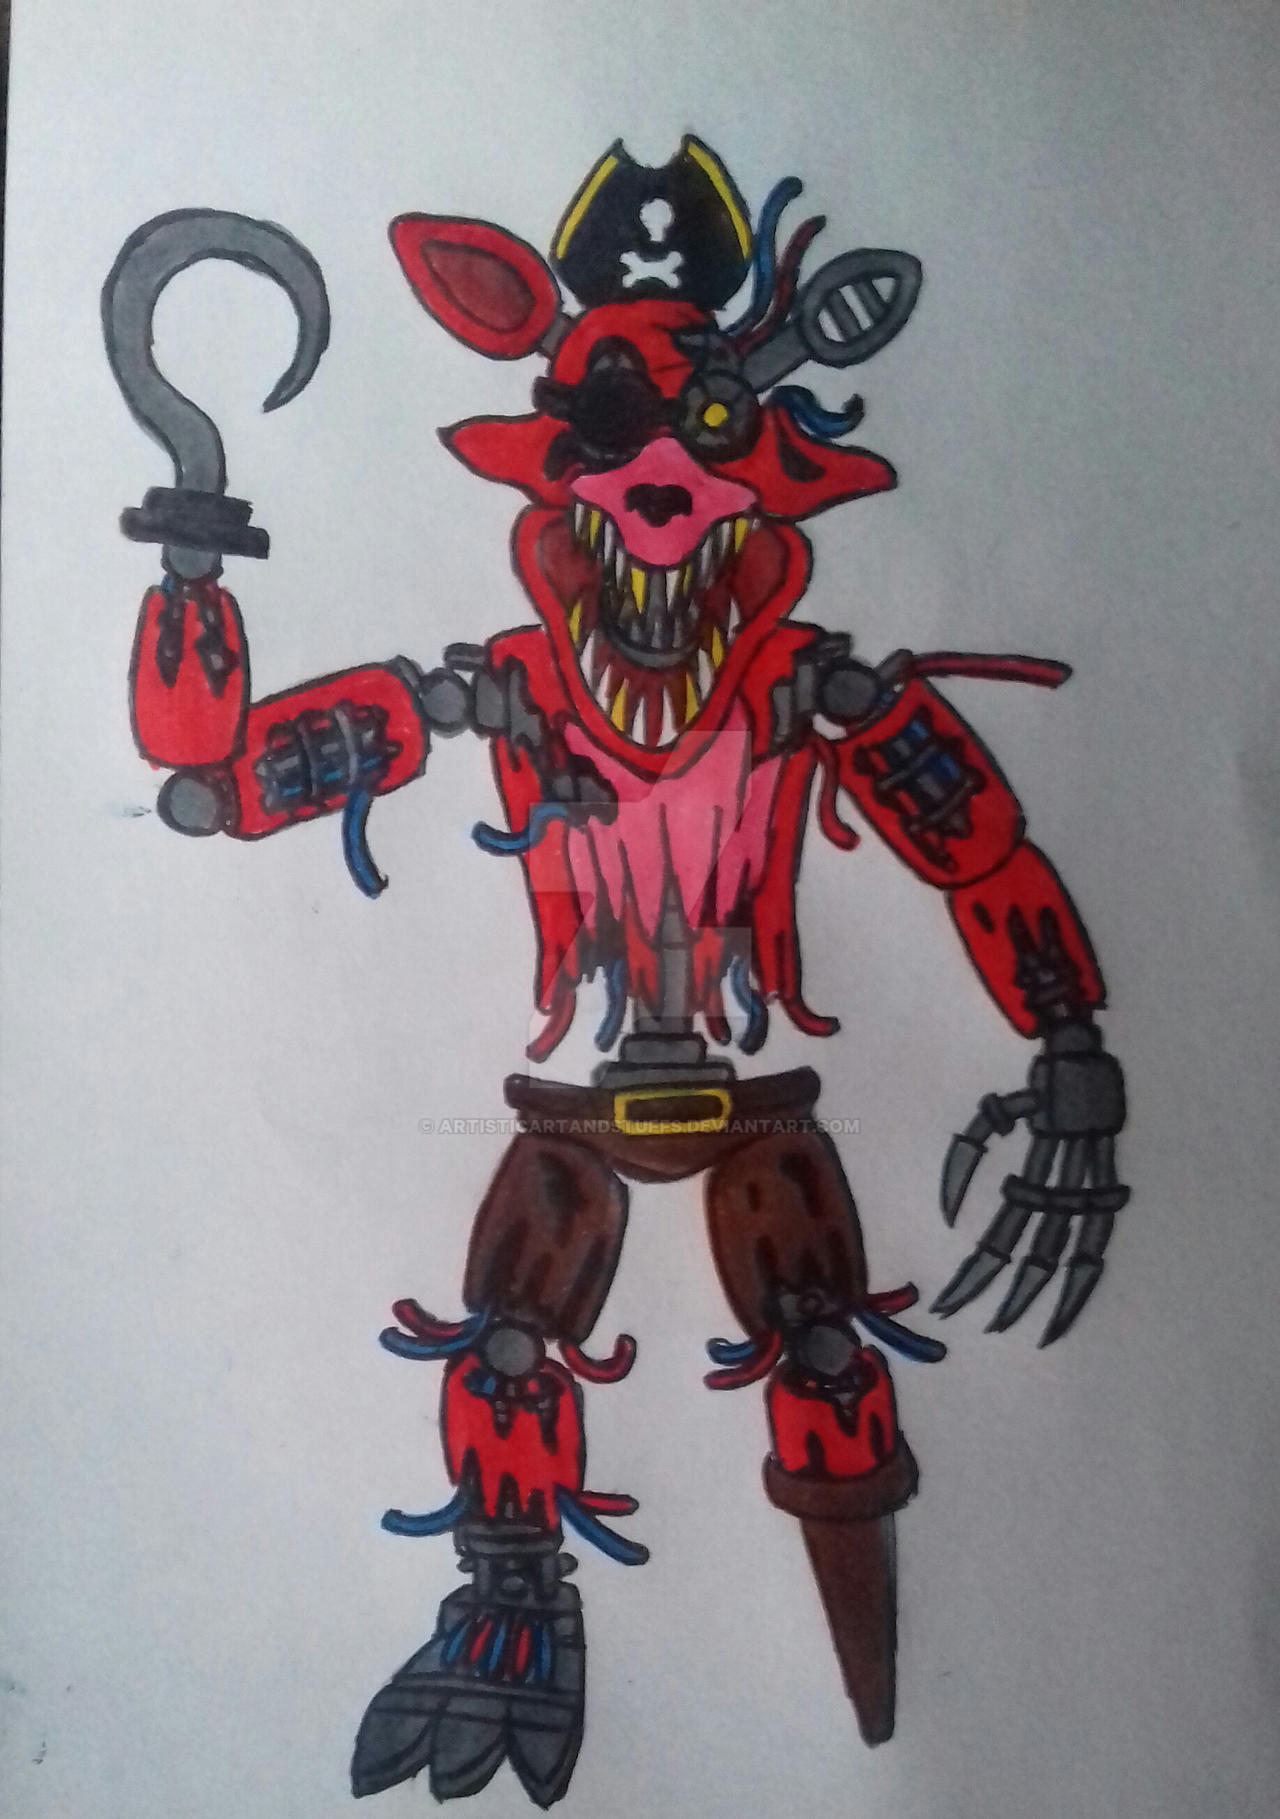 Withered Foxy - Desenho de withered_foxy - Gartic